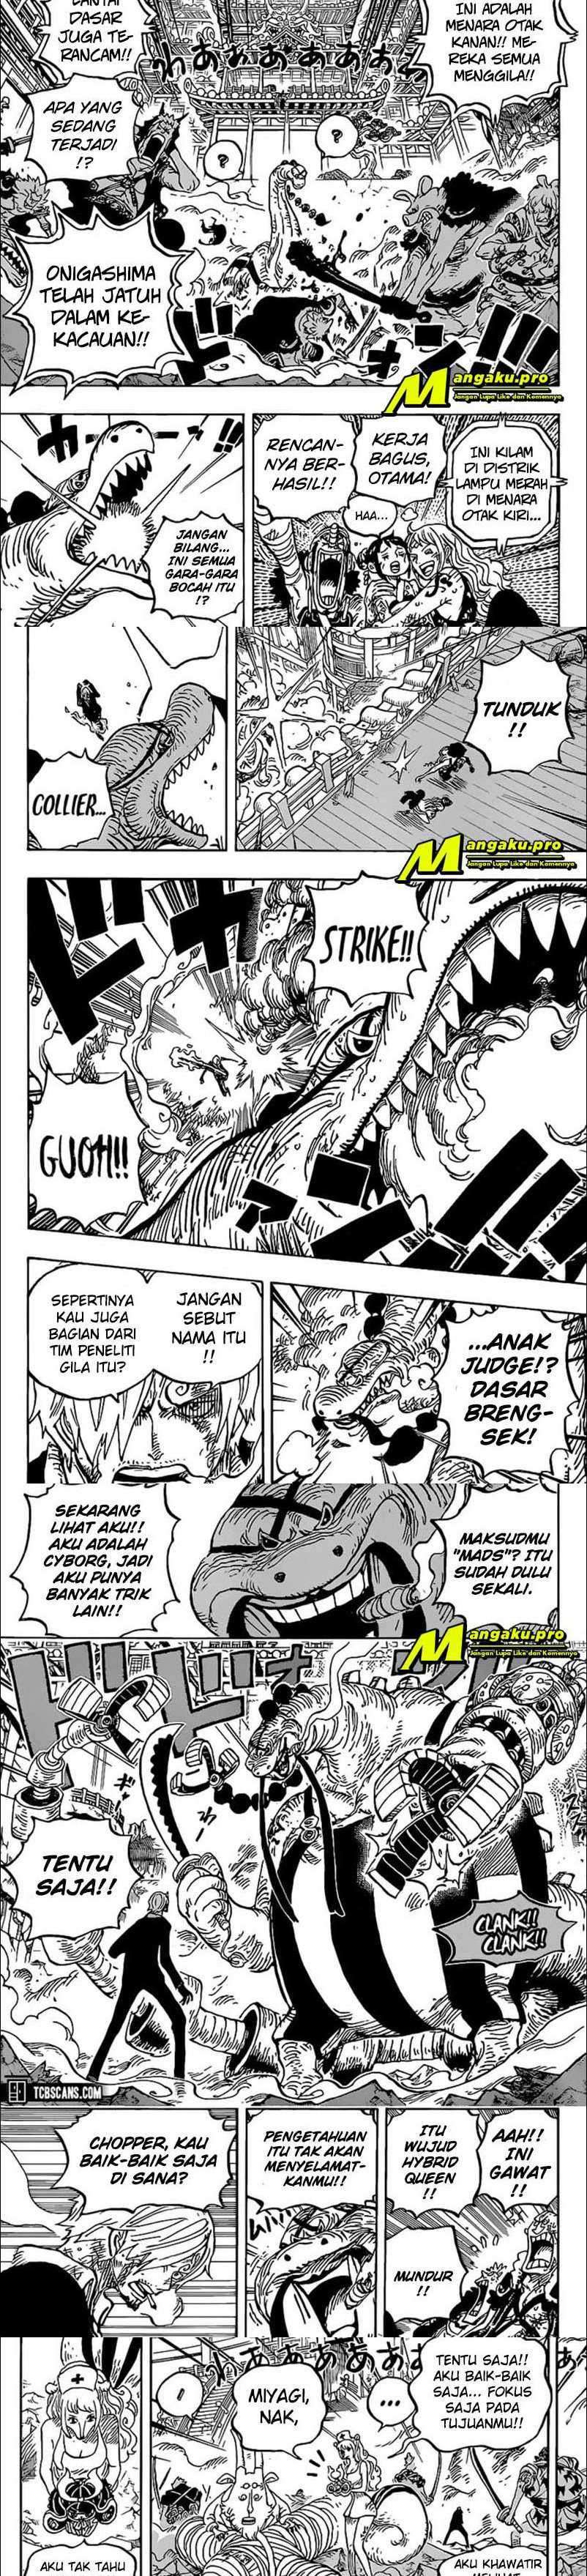 One Piece Chapter 1017 hd